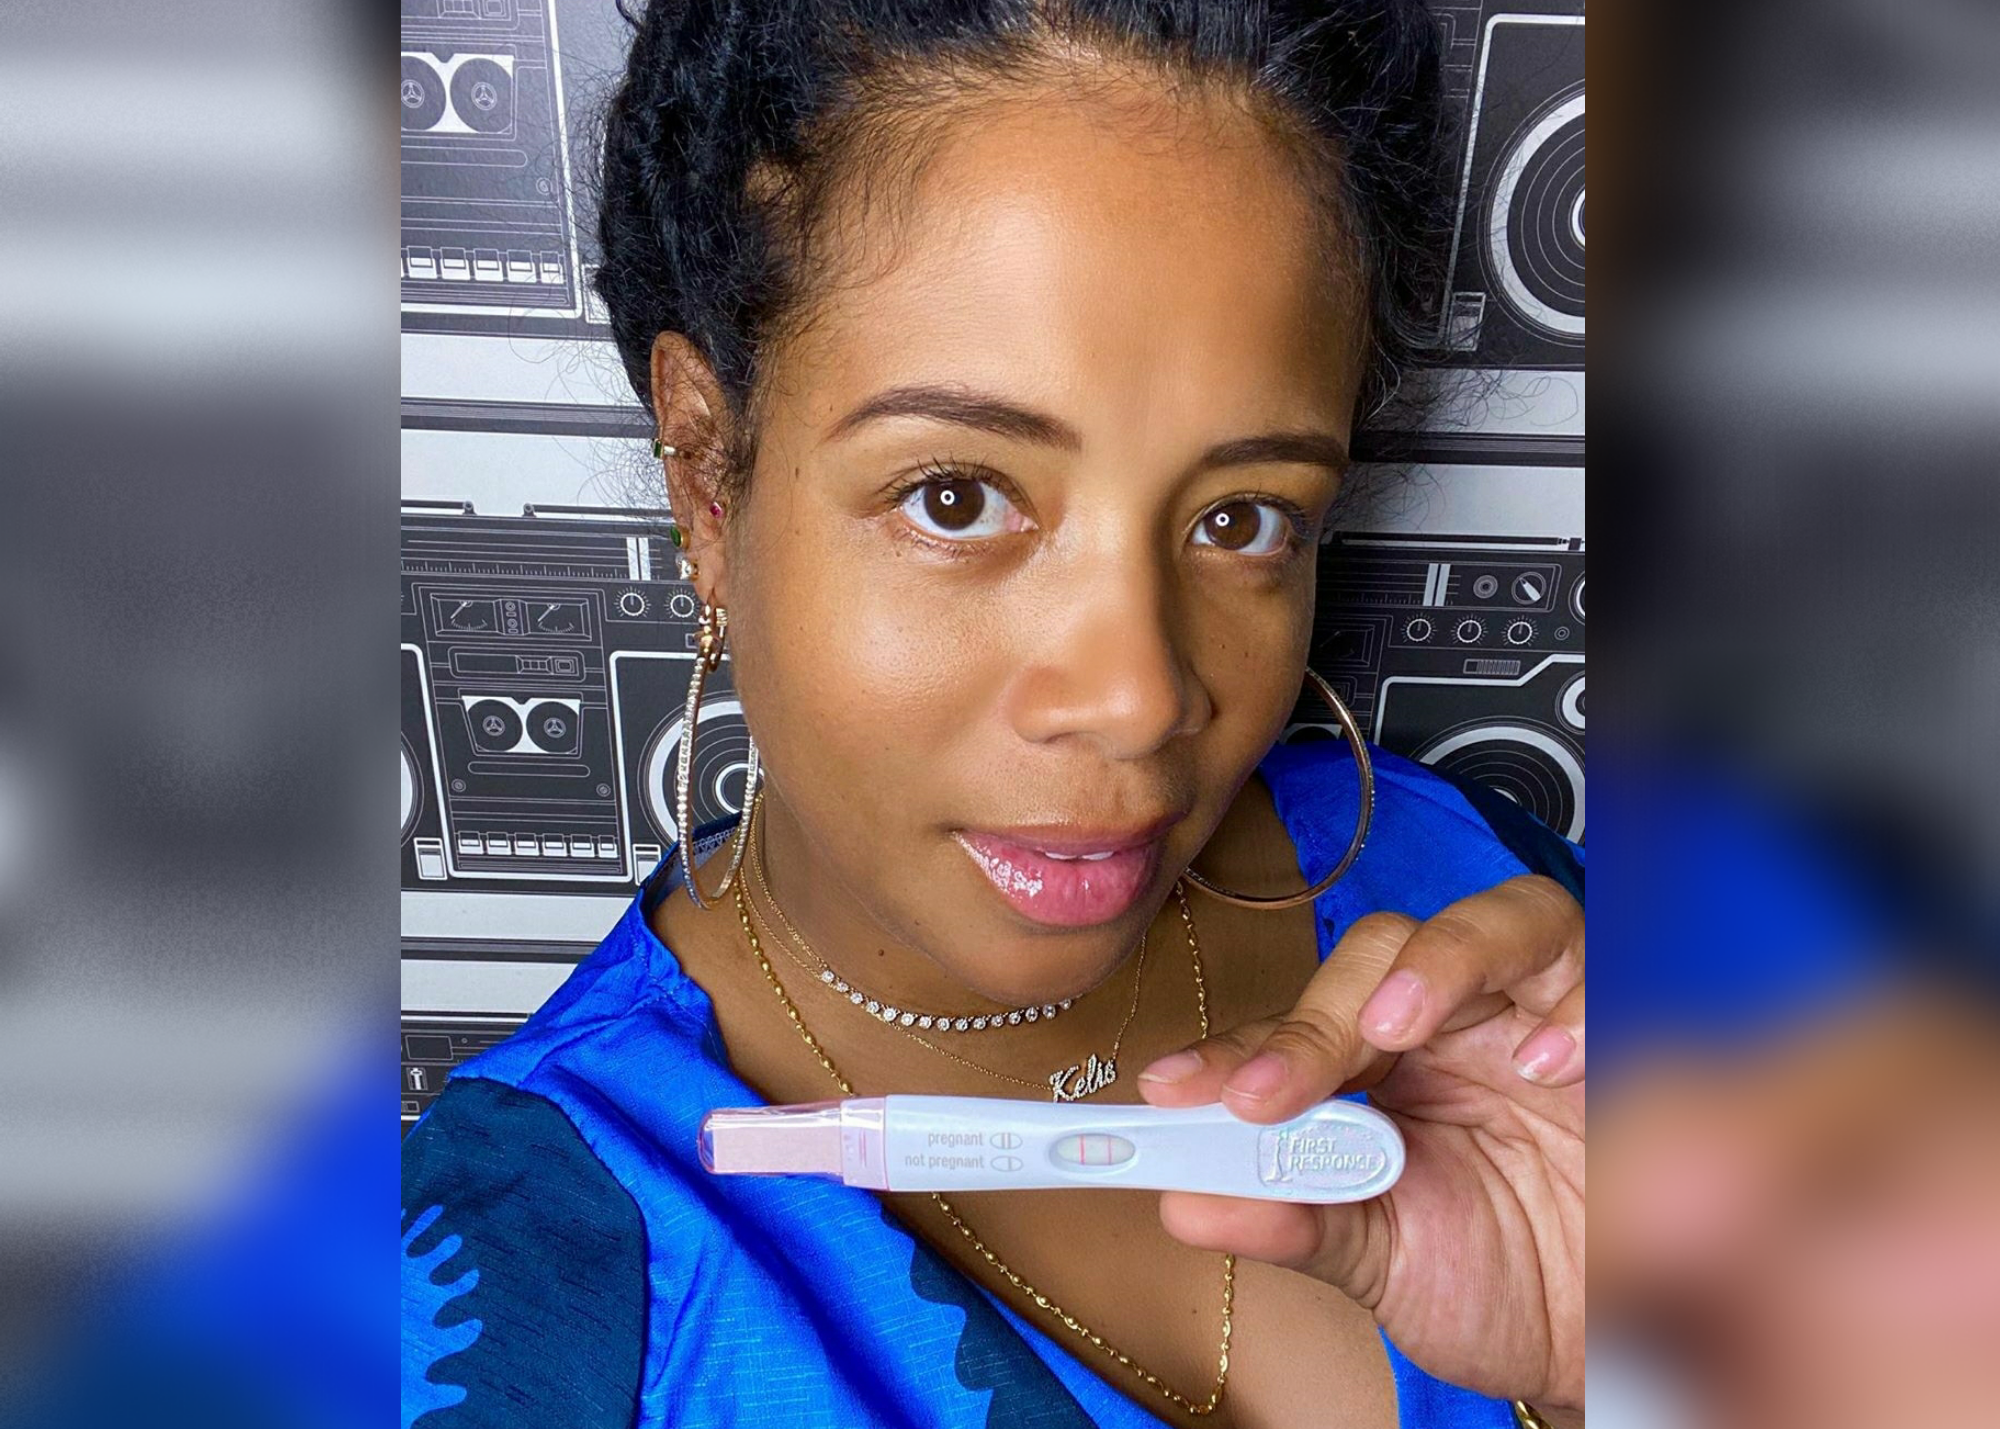 Kelis Announces She’s Pregnant With Her Third Child: “Table For 5 Please!”